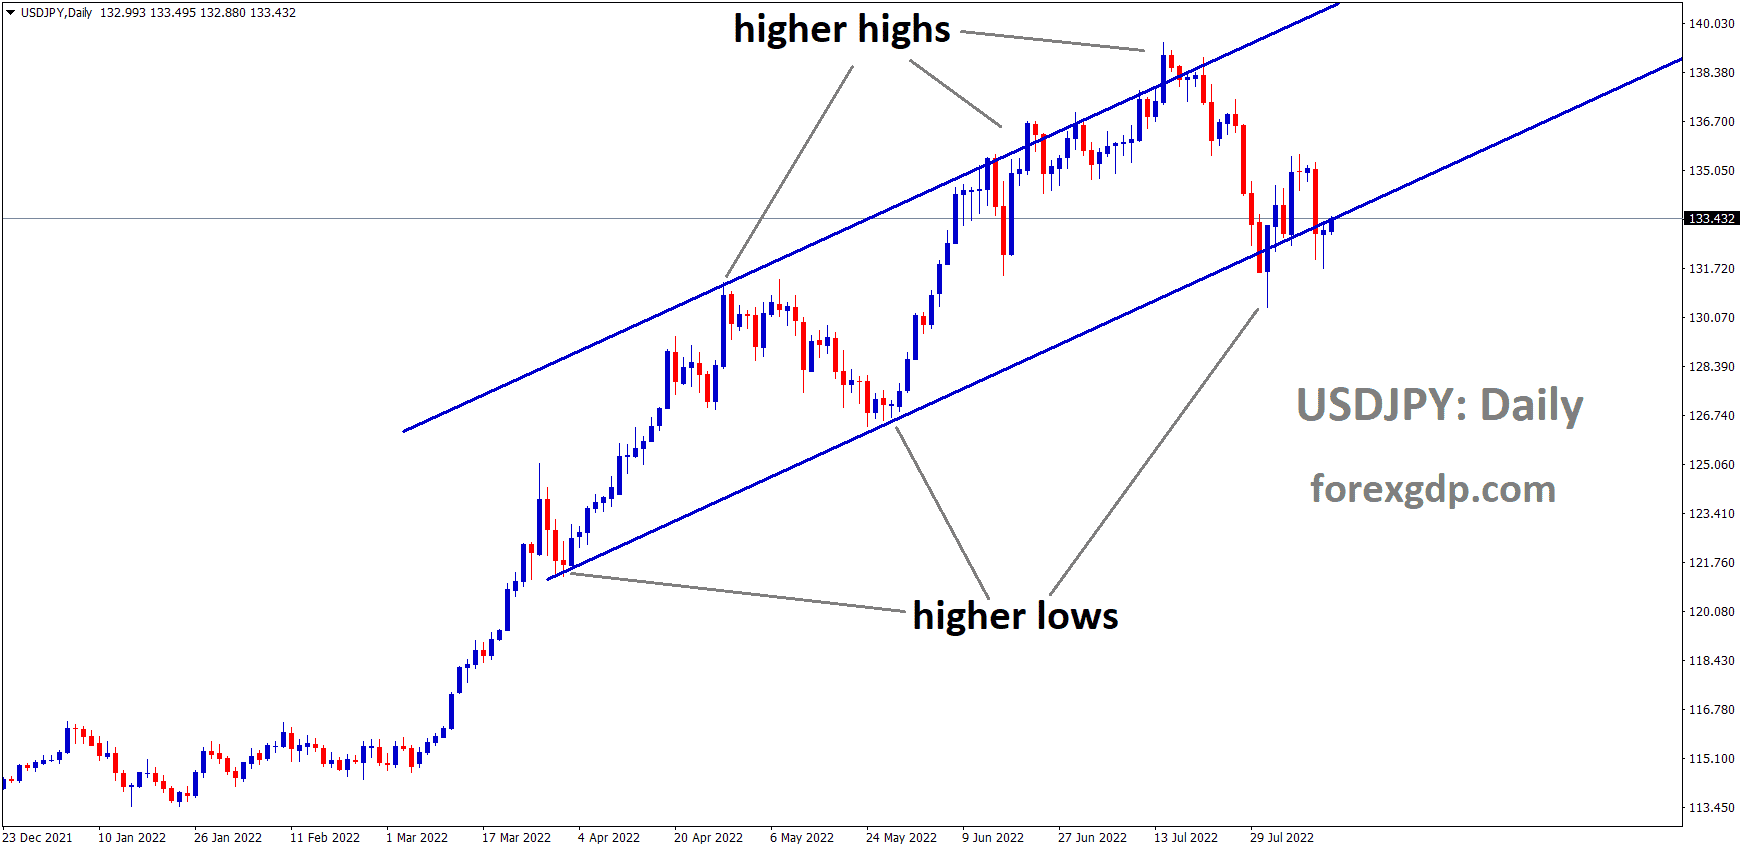 USDJPY is moving in an Ascending channel and the Market has reached the higher low area of the channel